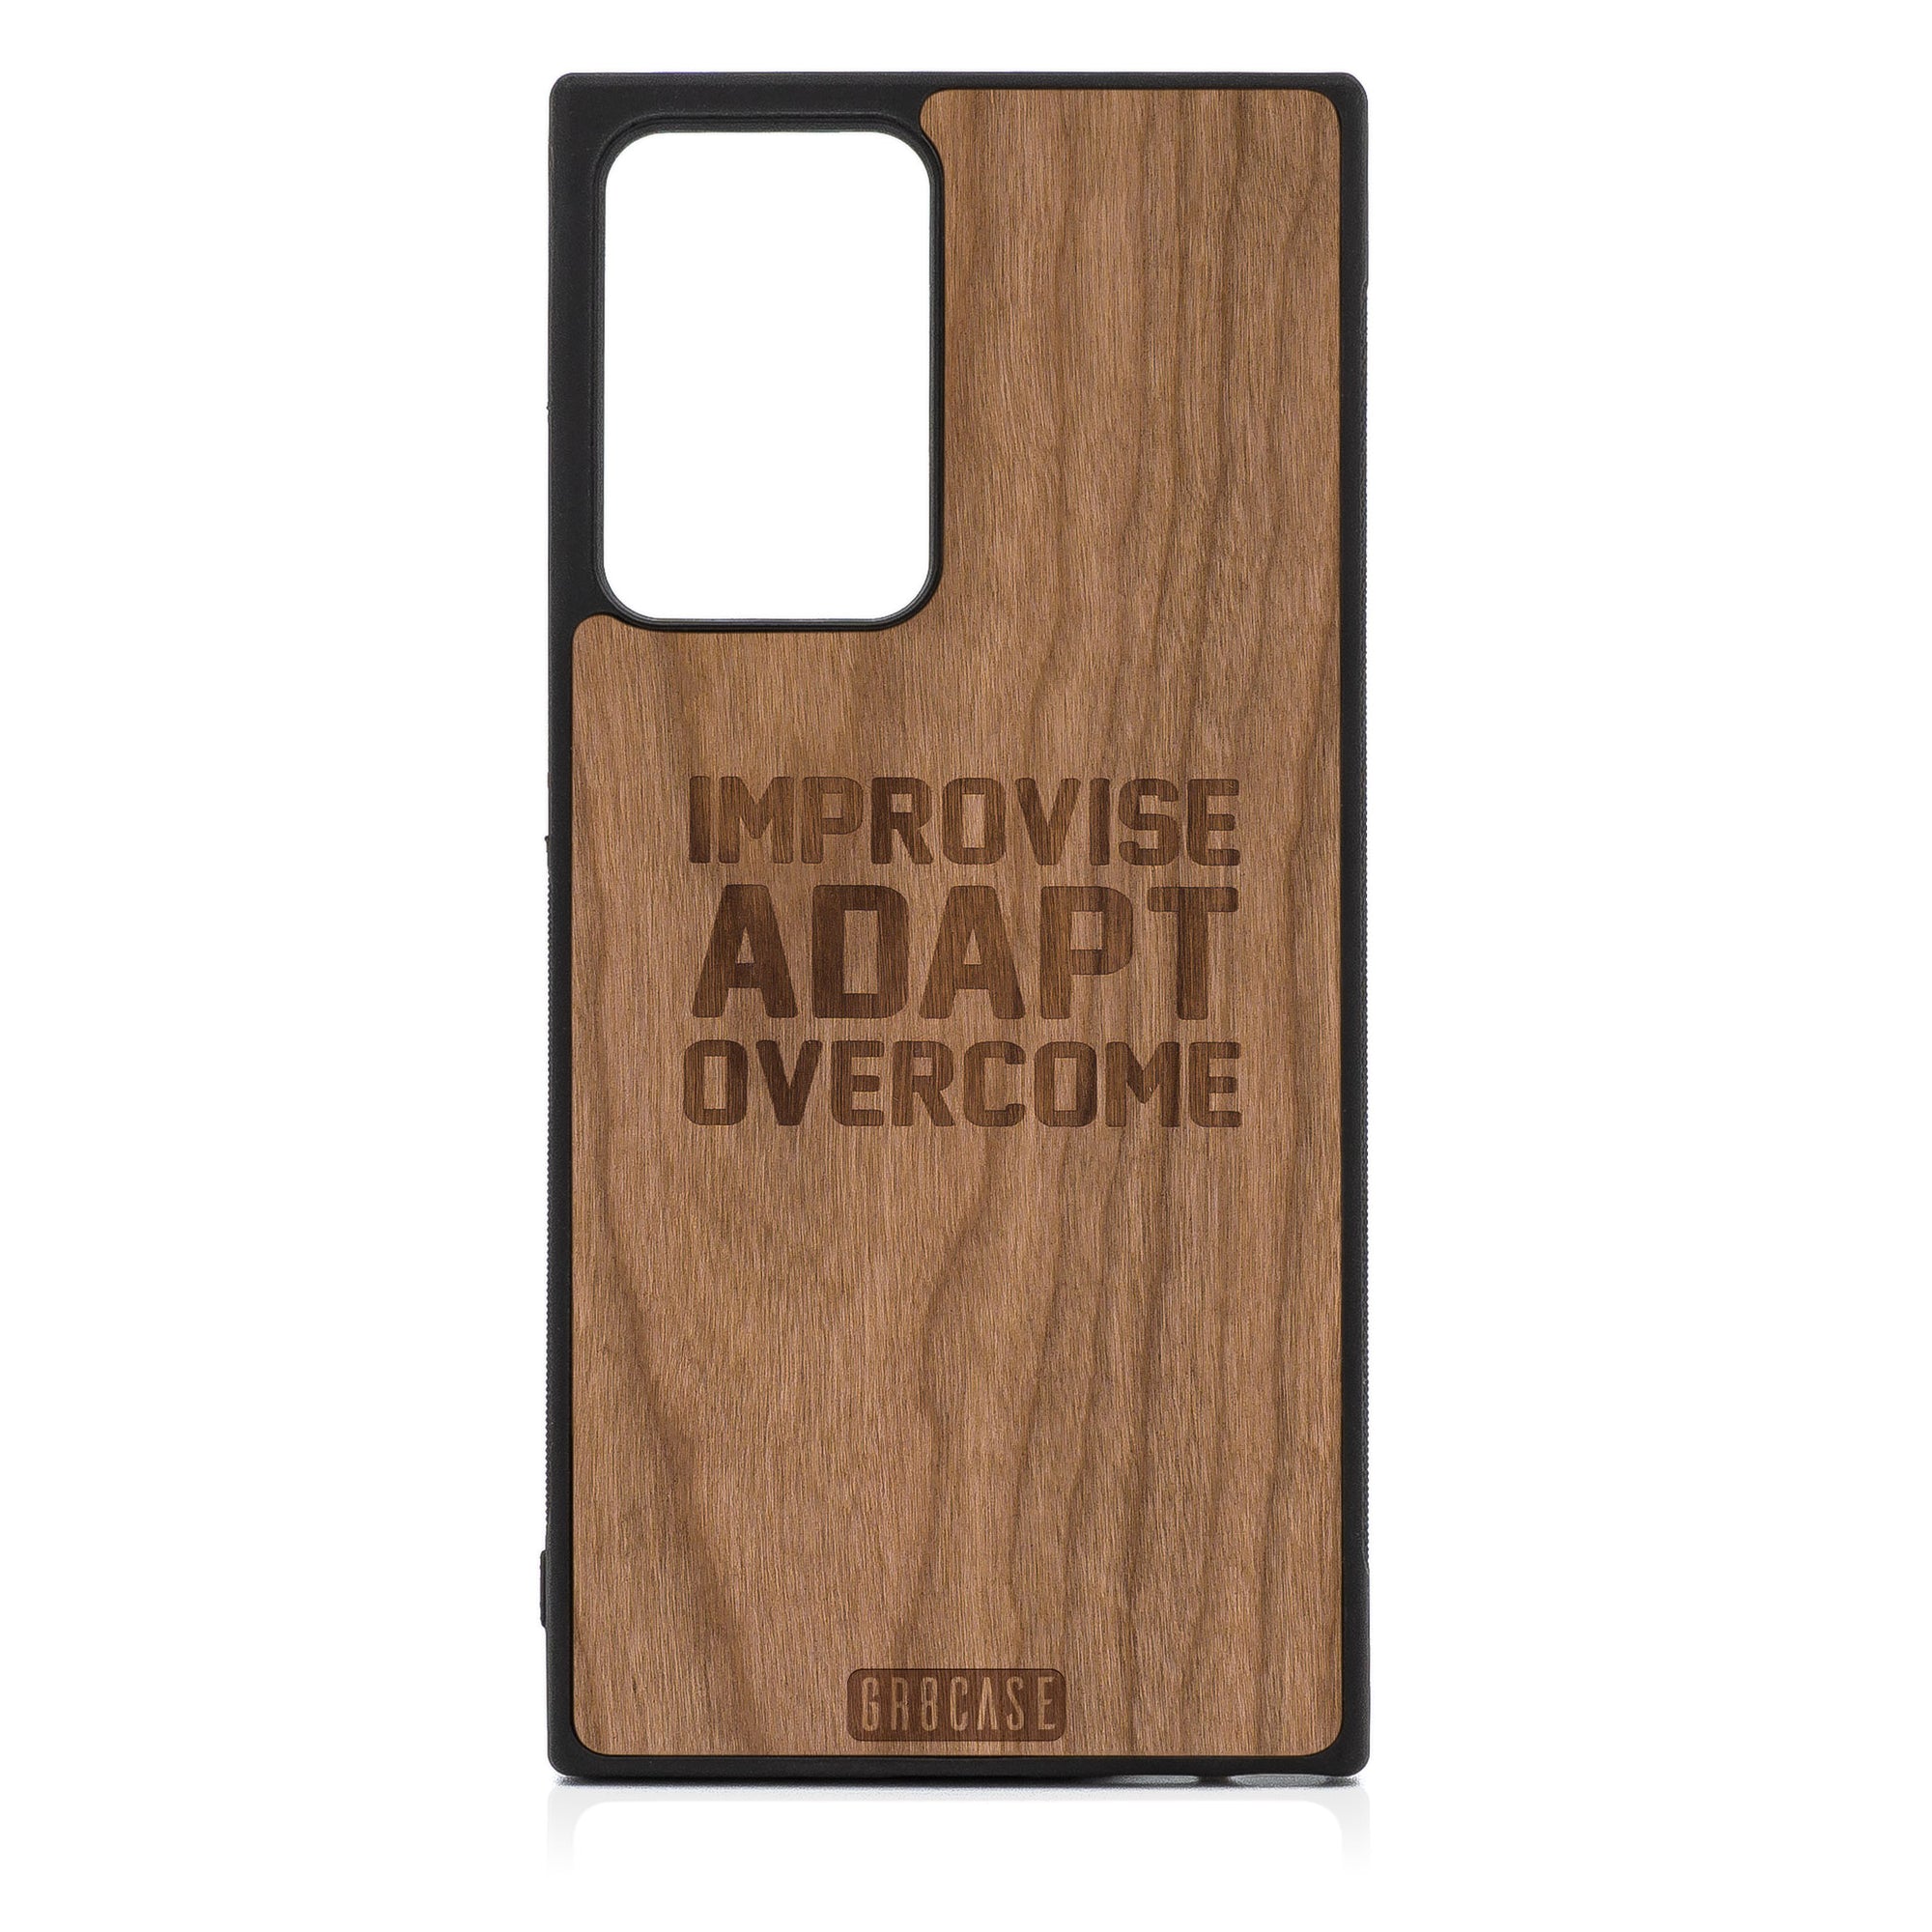 Improvise Adapt Overcome Design Wood Case For Samsung Galaxy Note 20 Ultra